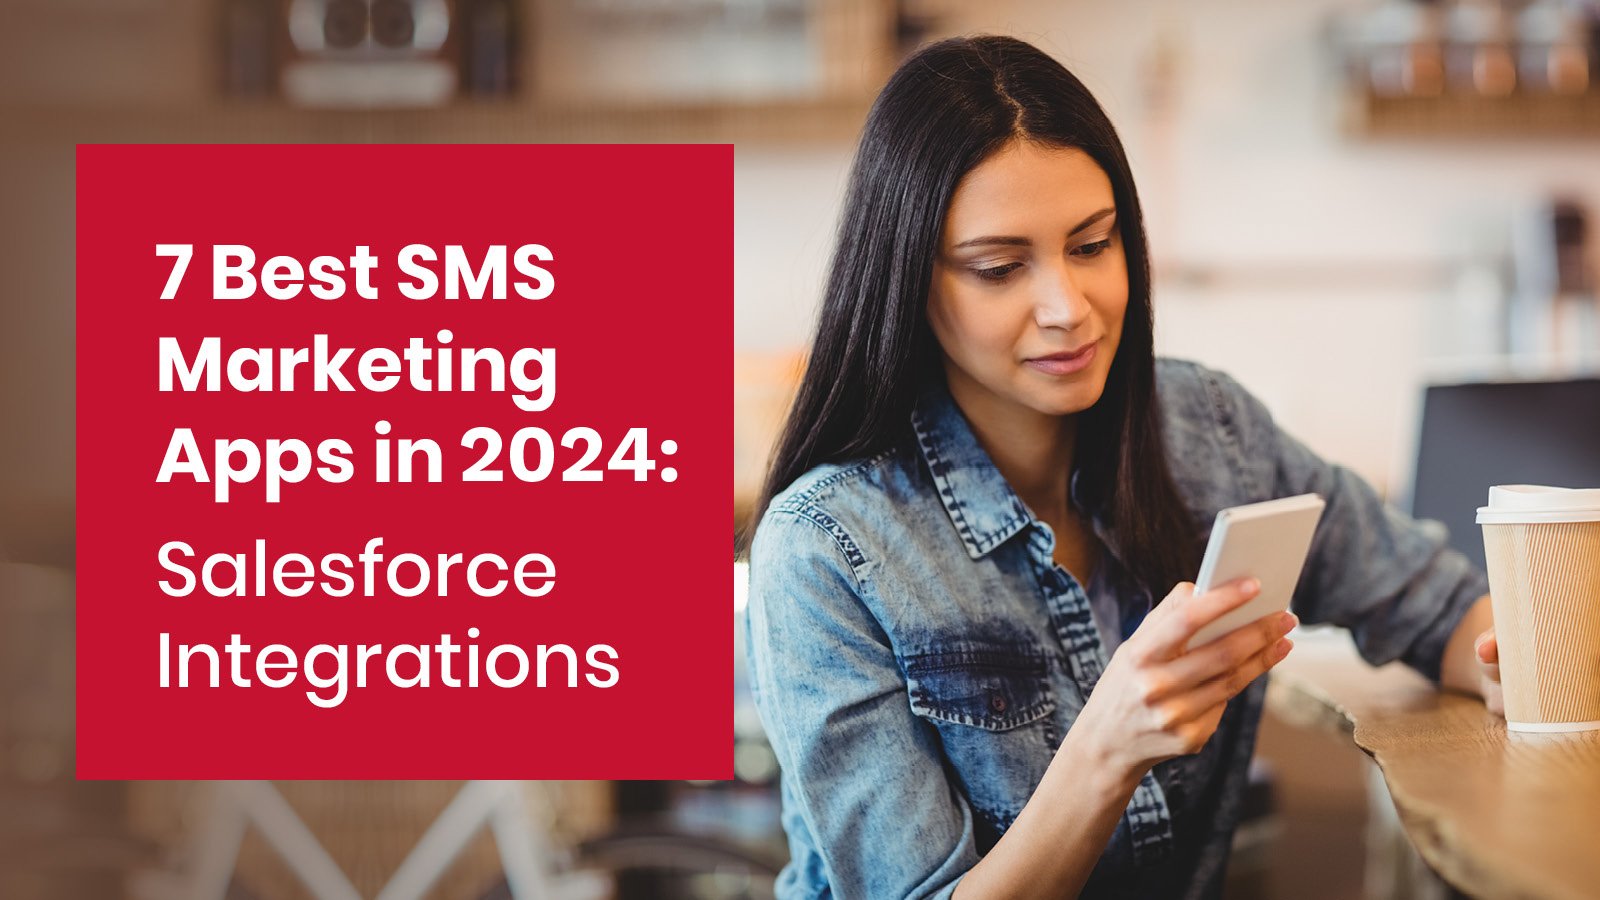 Check out the 7 best SMS marketing apps of 2023 in this article.